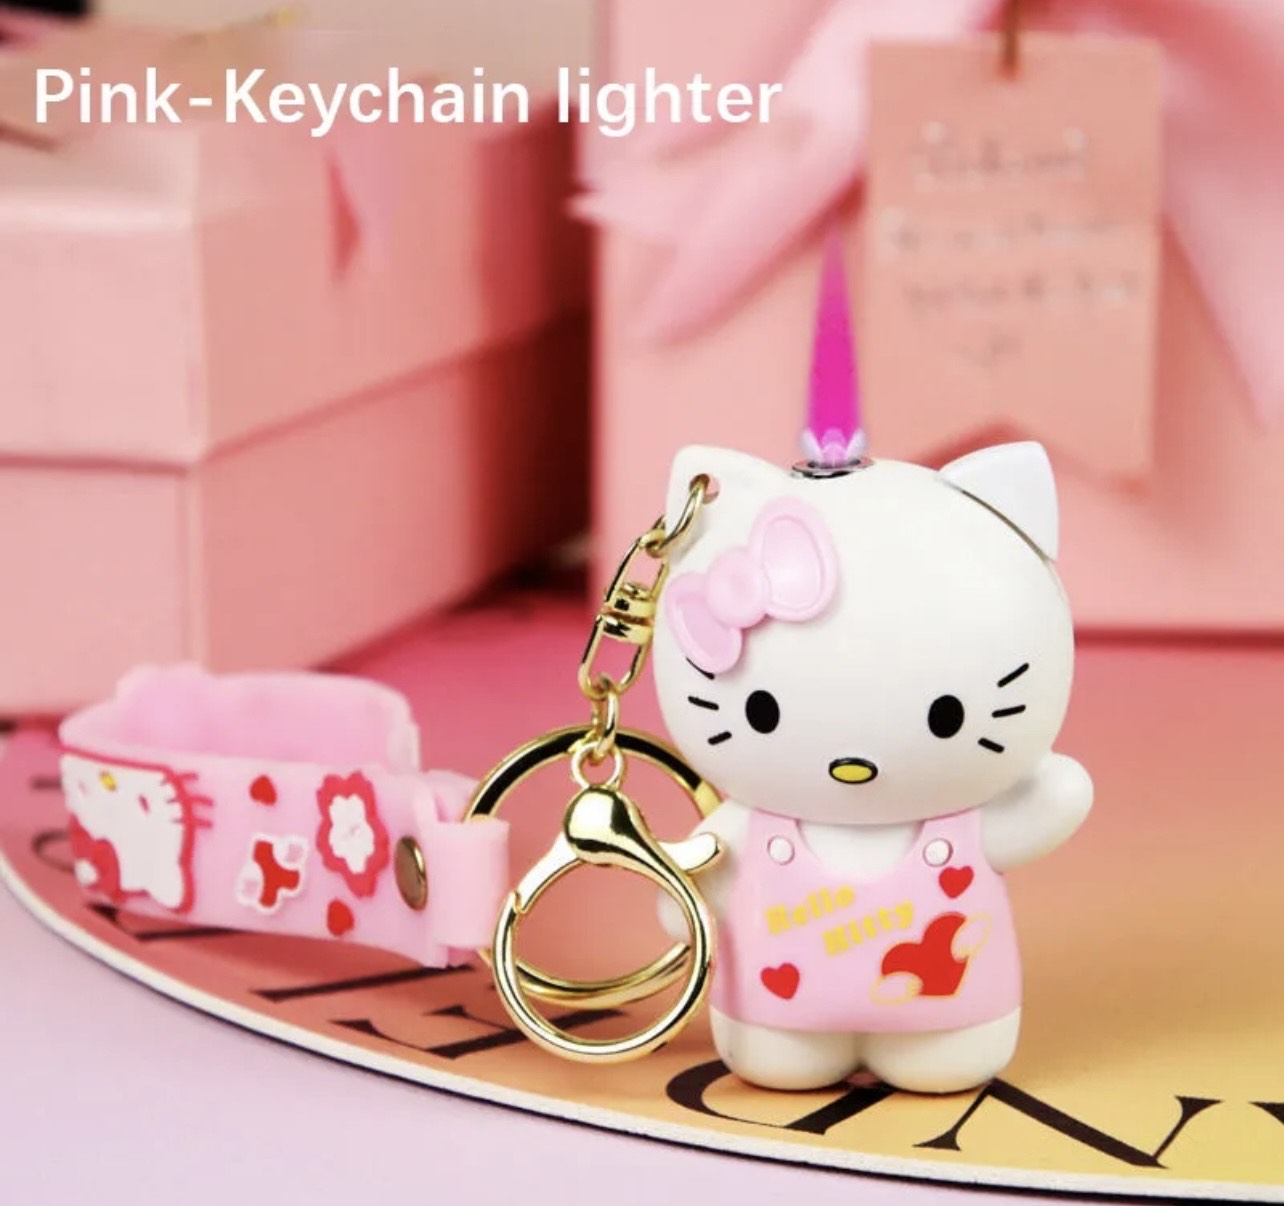 Kitty Pink Flame Keychain - Adorable Cartoon Cat Design White and Pink